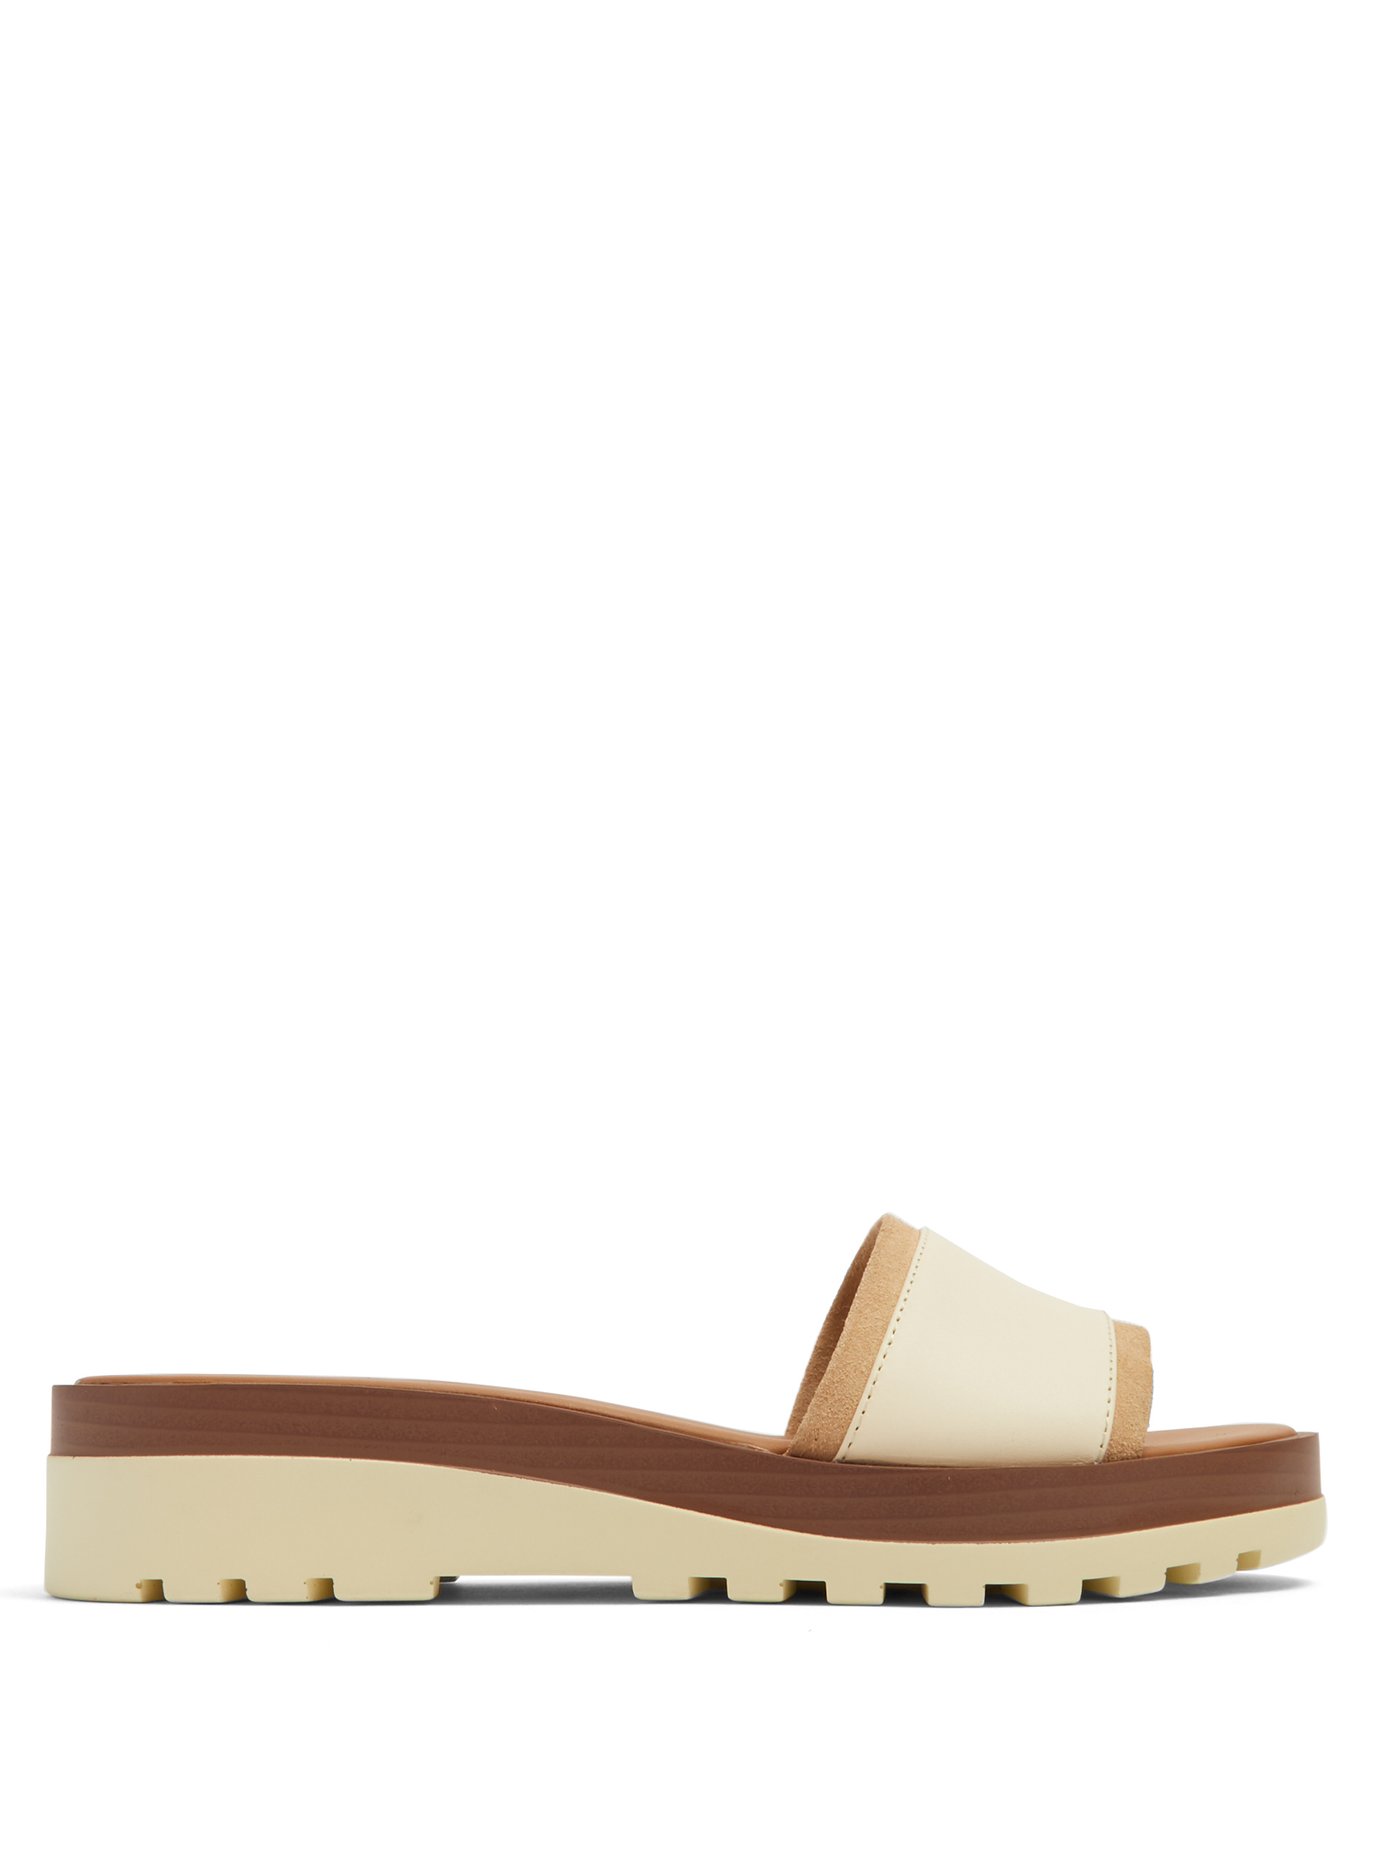 see by chloe leather slides